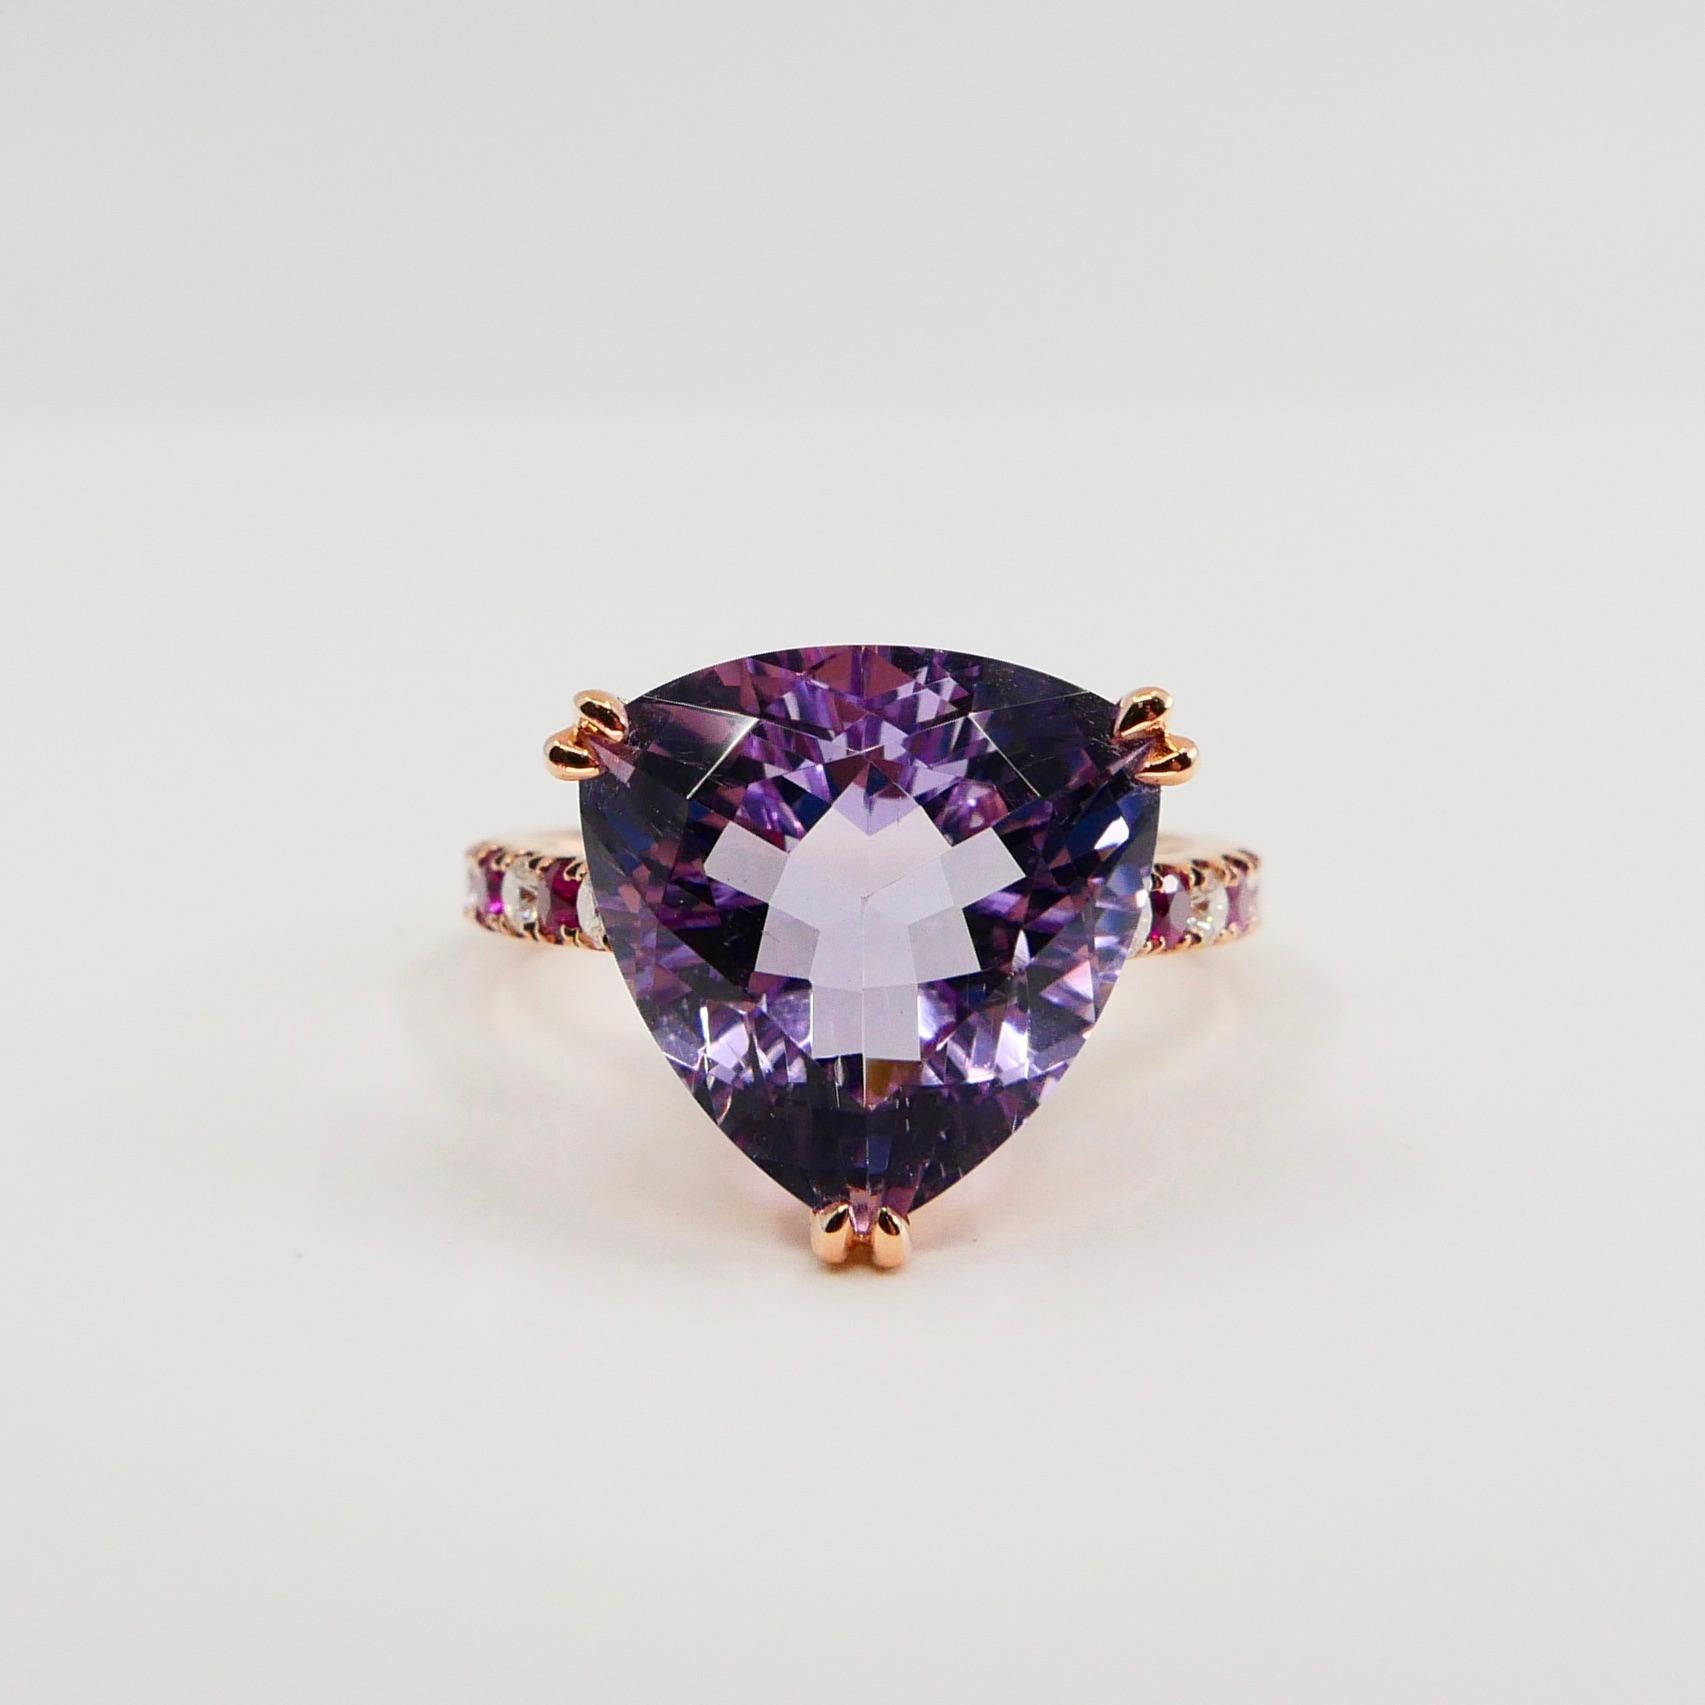 6.28 Carat Trillion Cut Amethyst, Ruby and Diamond Cocktail Ring, 18k Rose Gold For Sale 3